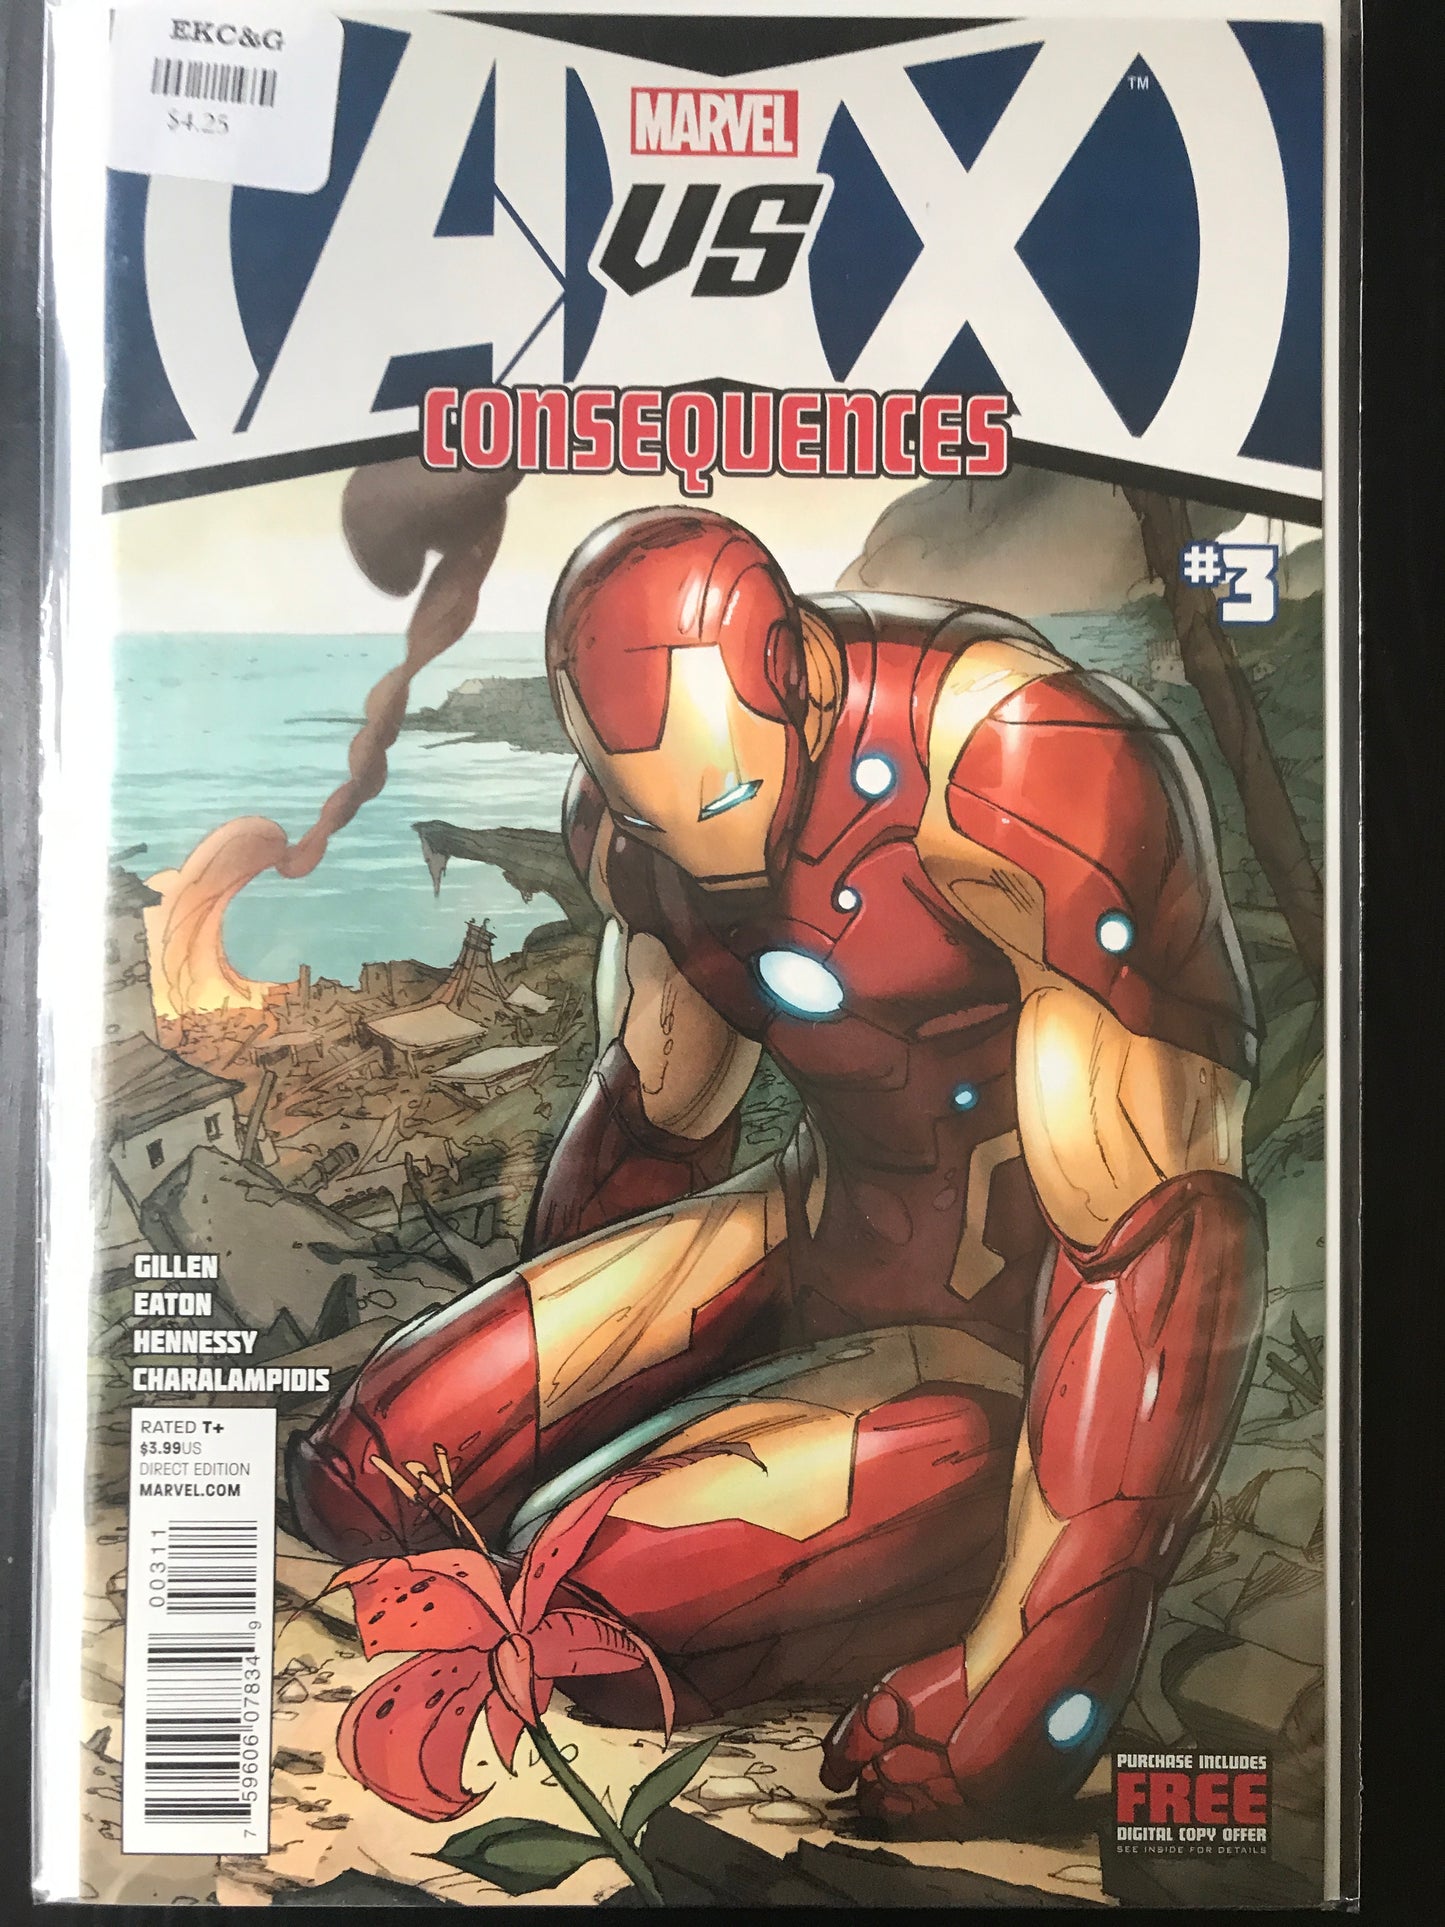 AvX Consequences (2012 Marvel) #3A